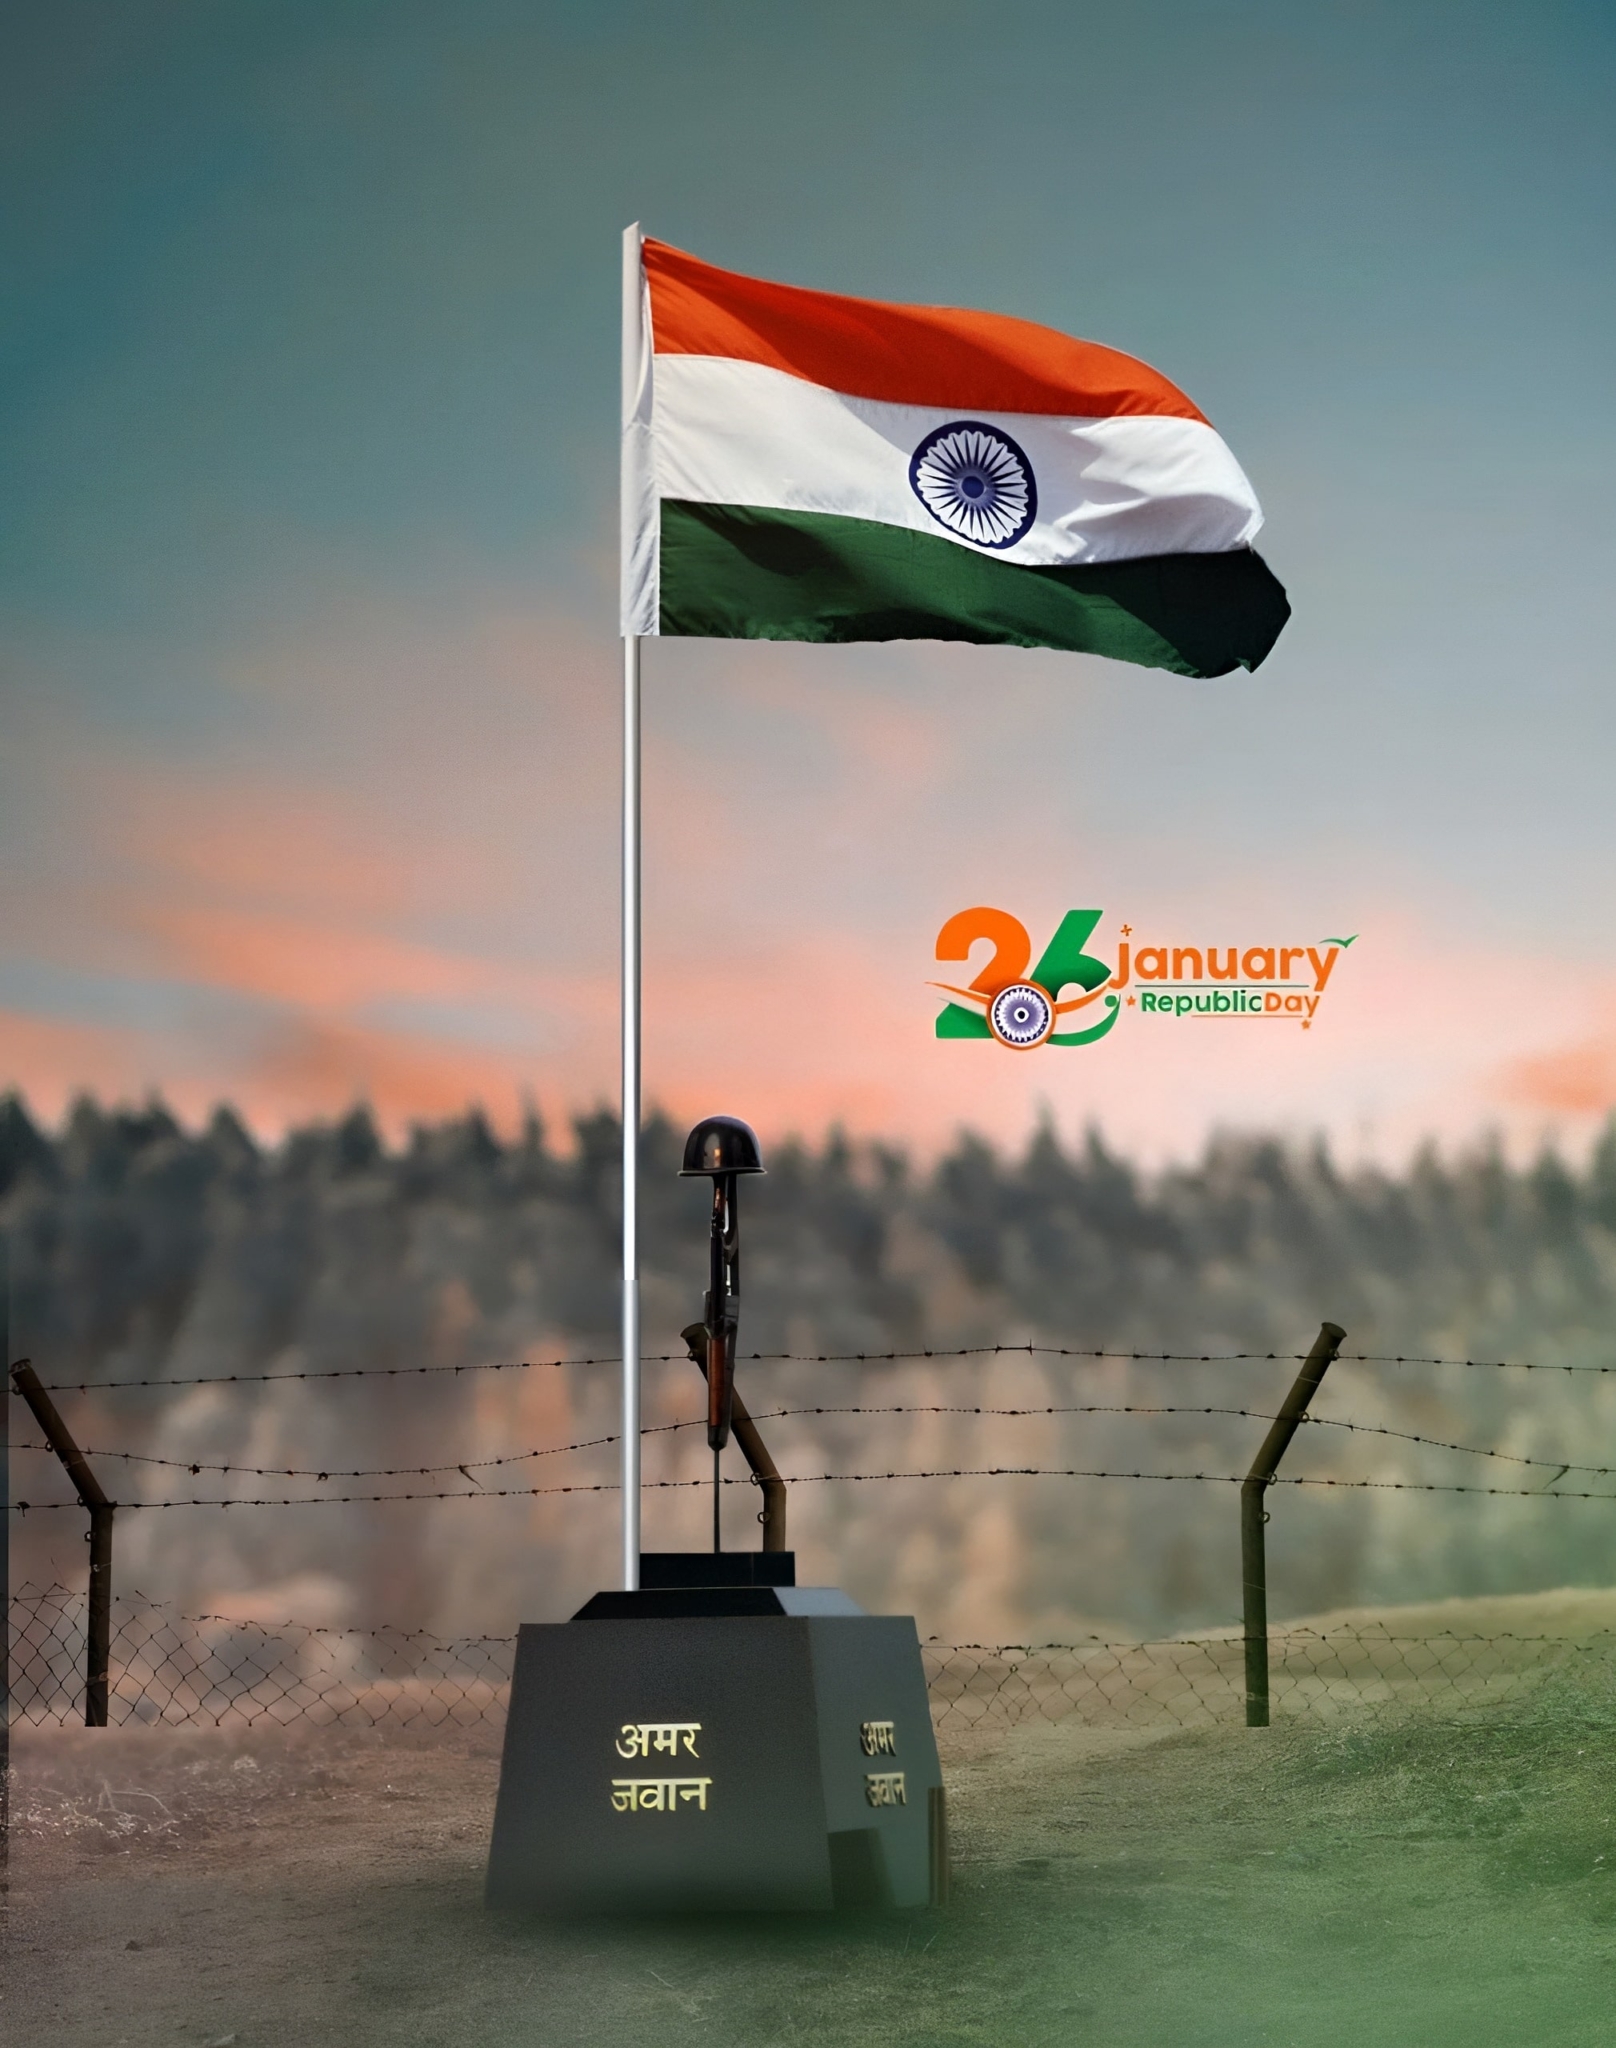 India Flag Republic Day 26 January Background For Photo Editing